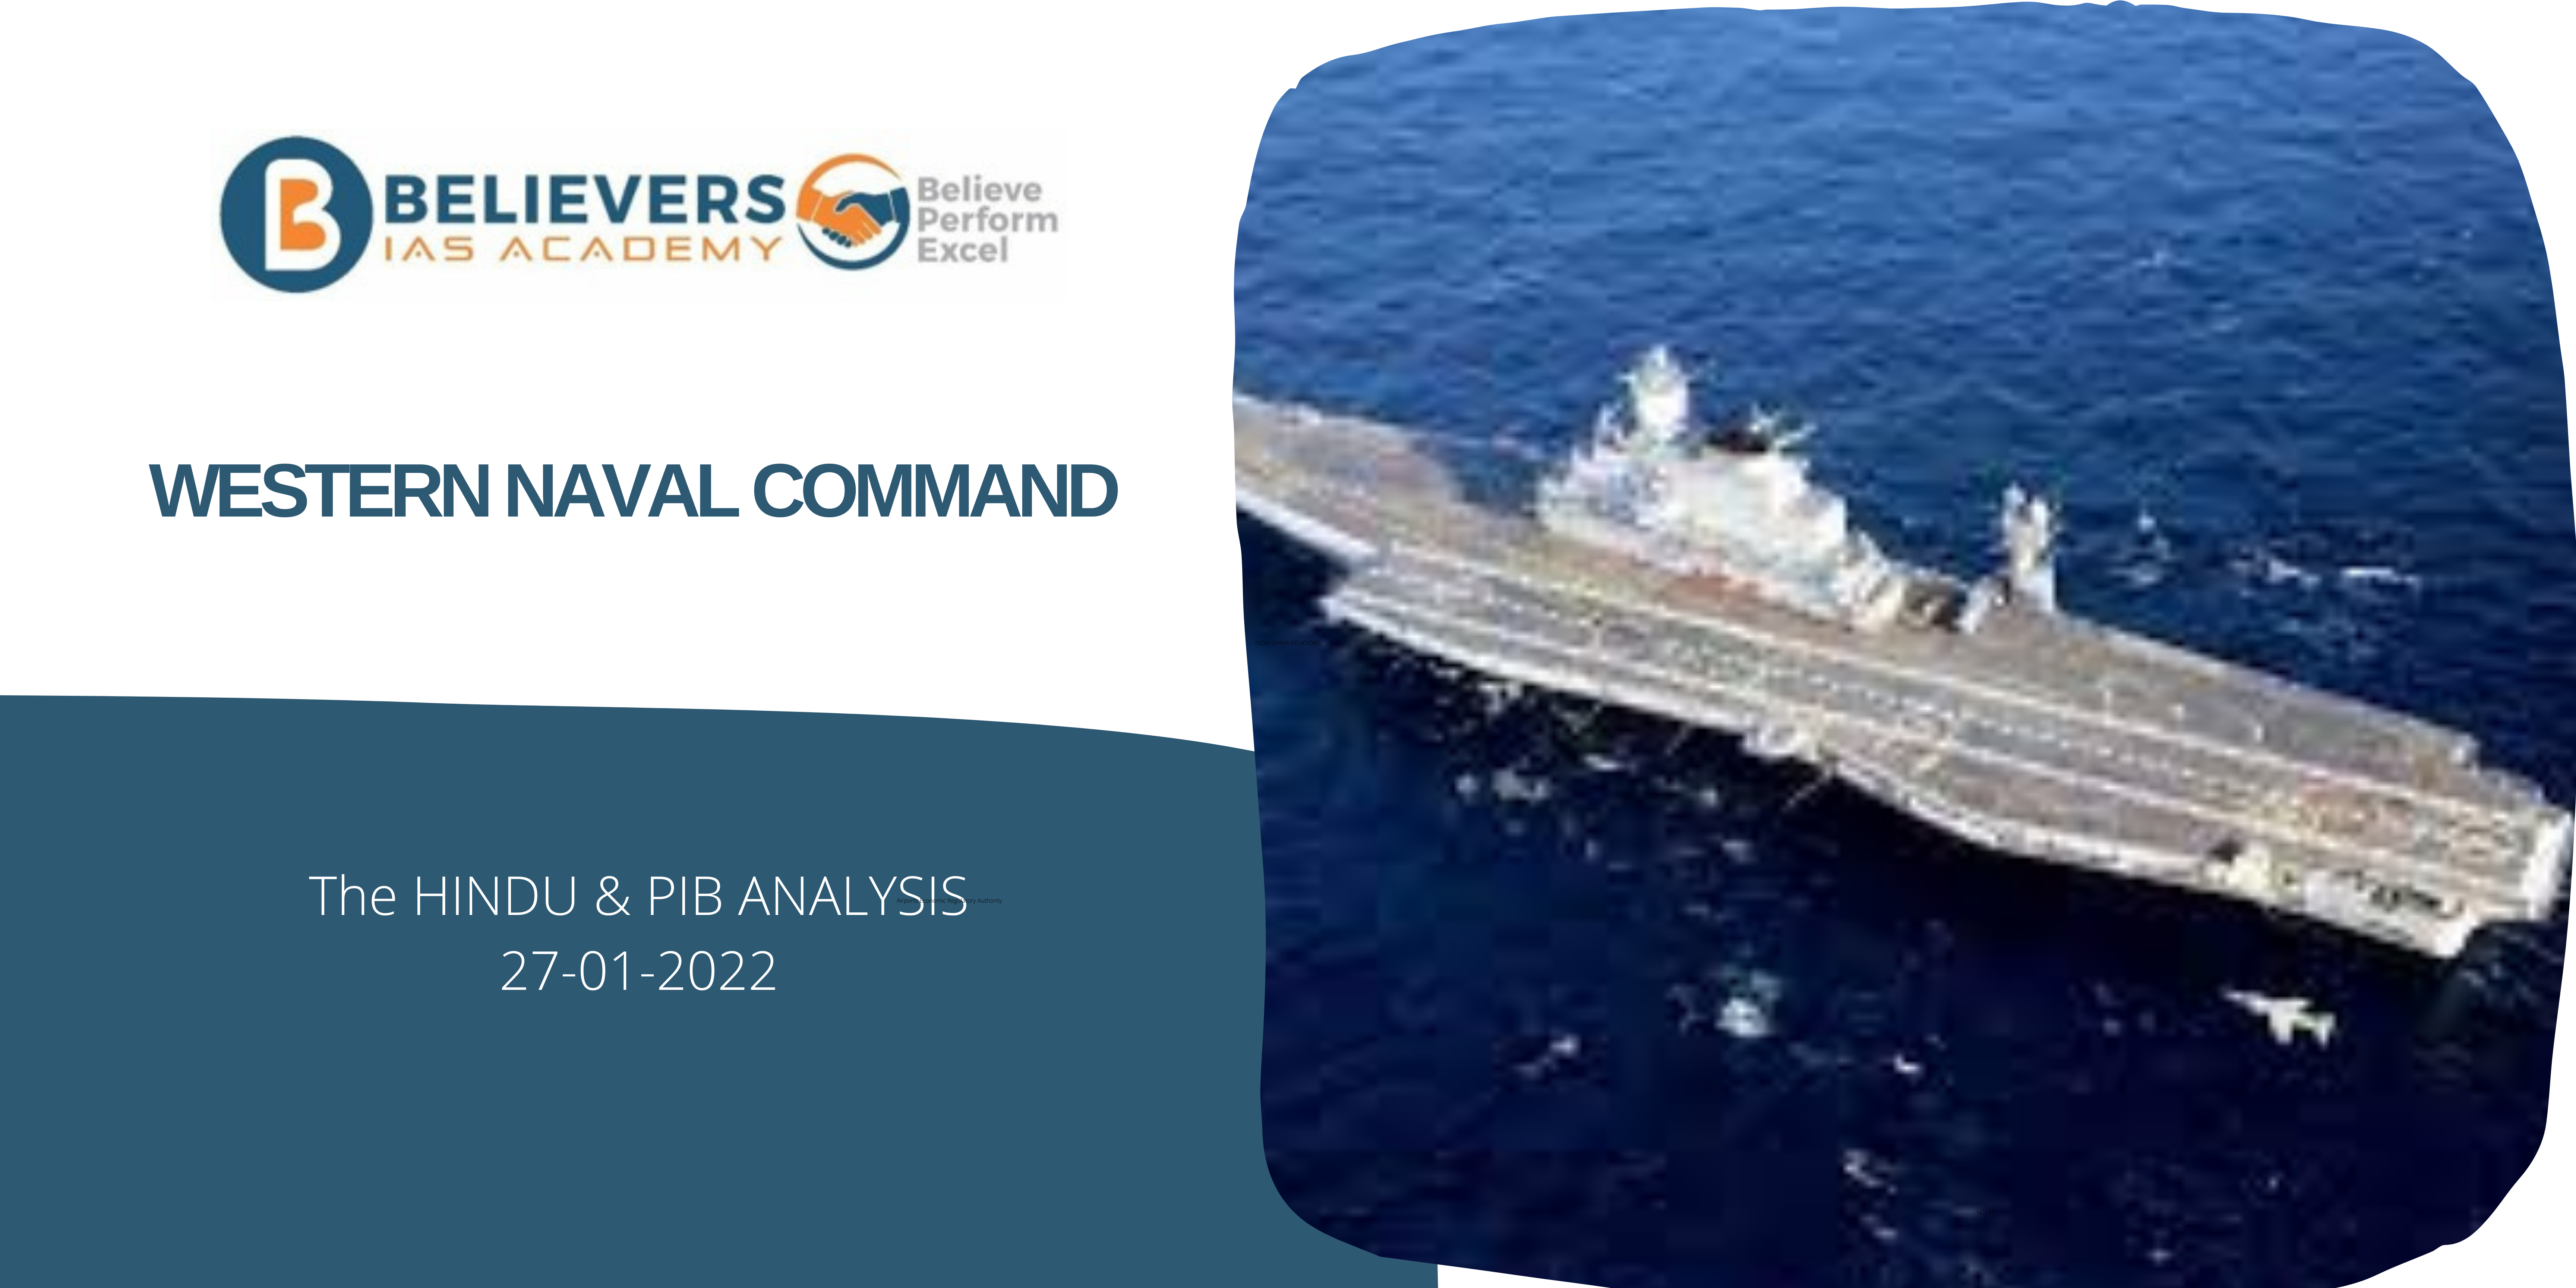 UPSC Current affairs - WESTERN NAVAL COMMAND